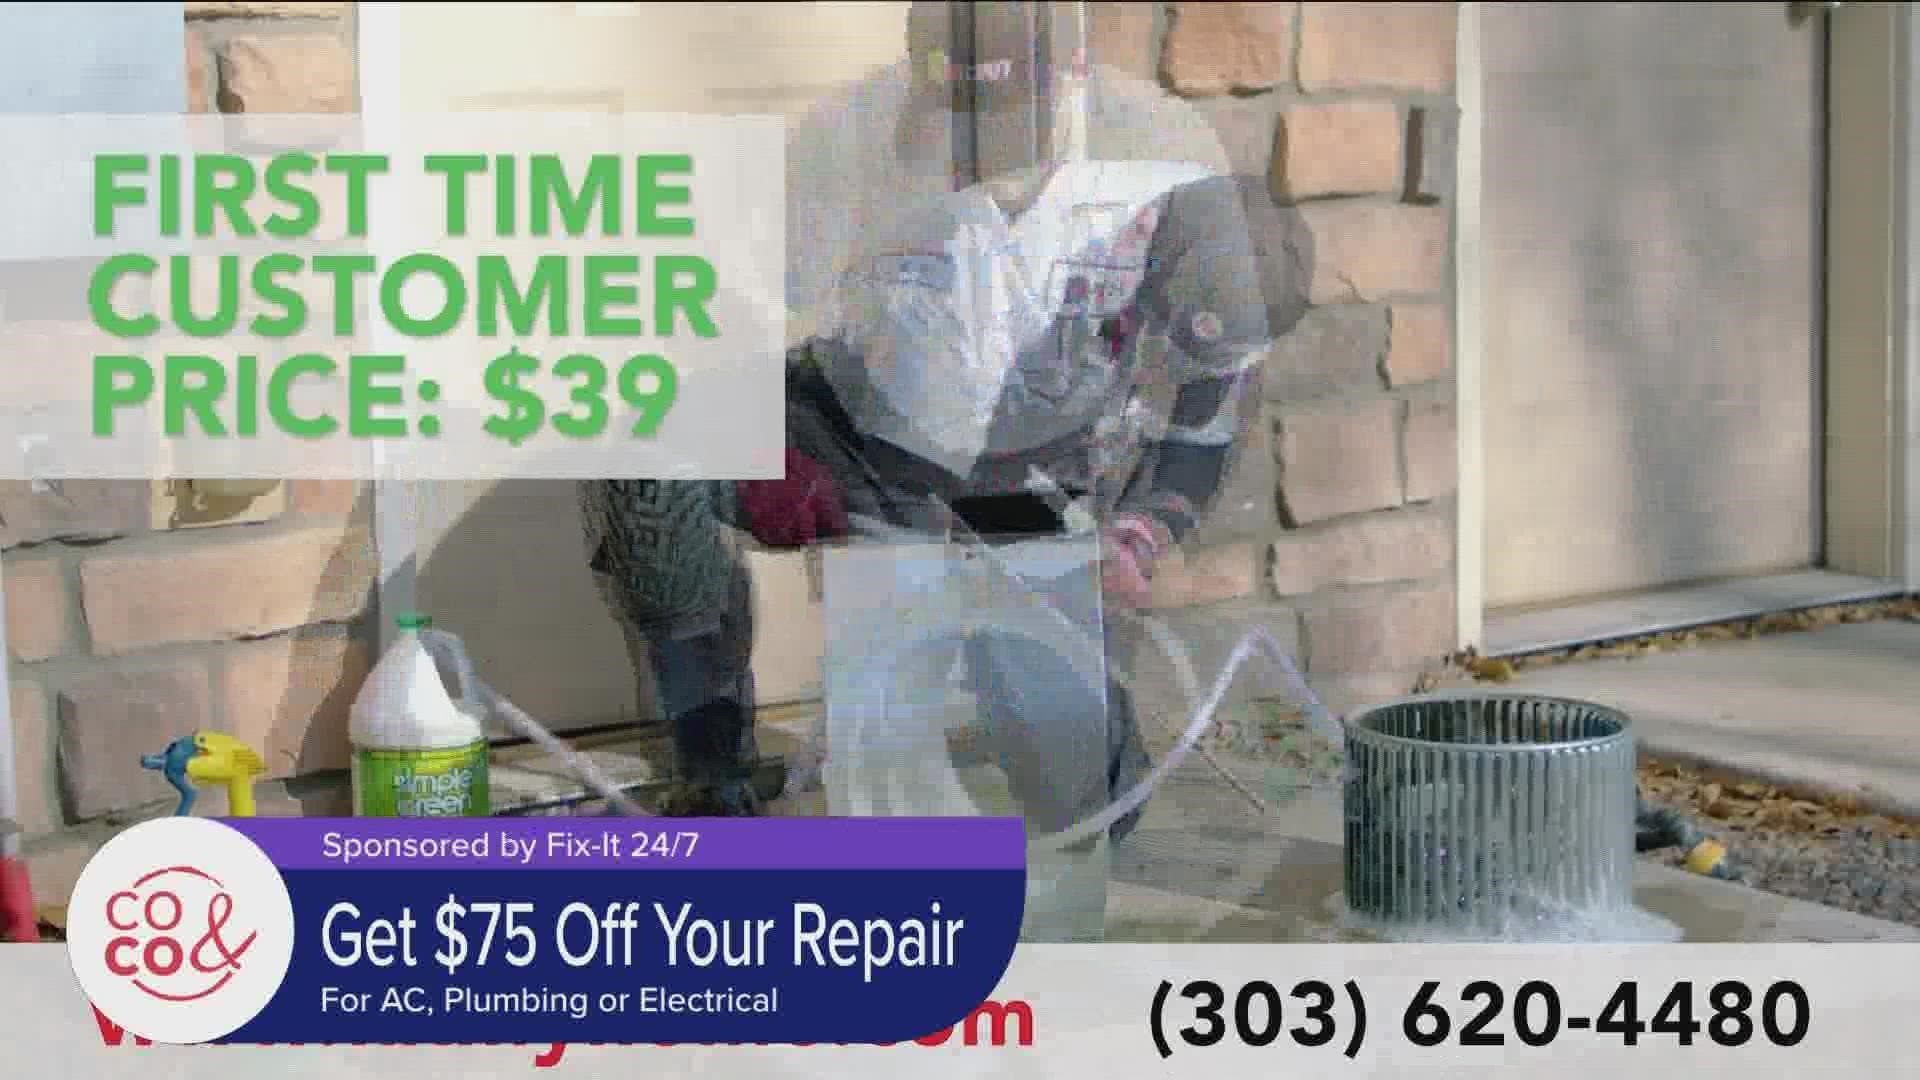 Call 720.441.5793 or visit FixMyHome.com to get started with Fix It 24/7. **PAID CONTENT**